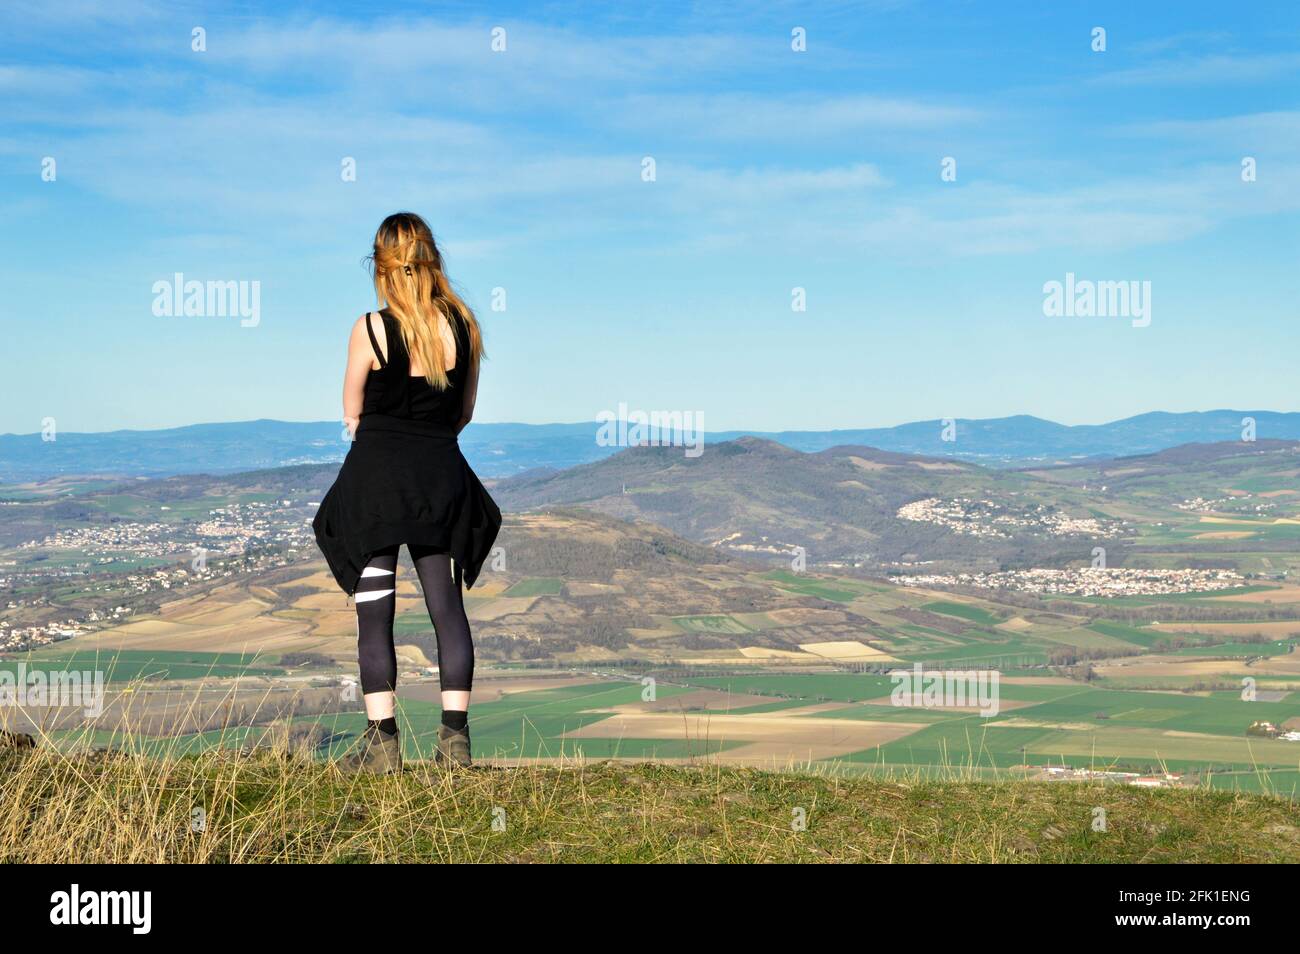 A hiker on top of a mountain with a beautiful view of volcanic mountains Stock Photo